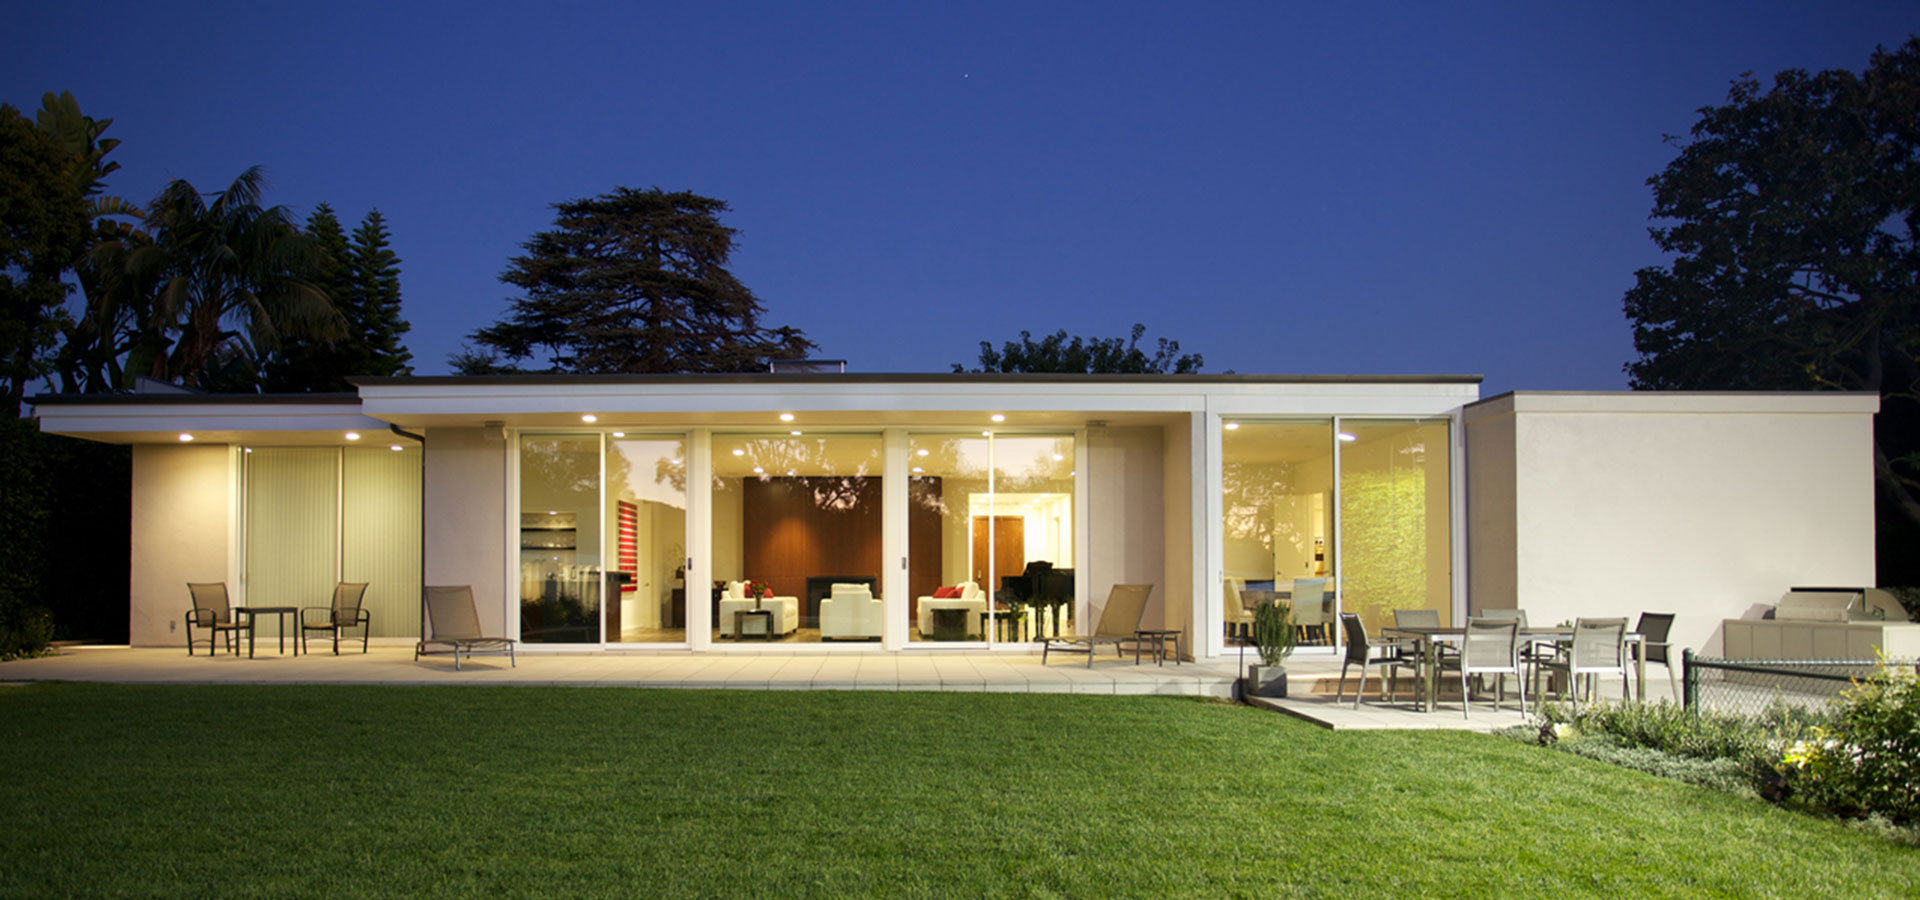 A view of the Brentwood Residence, a restored mid century home, from the backyard at night